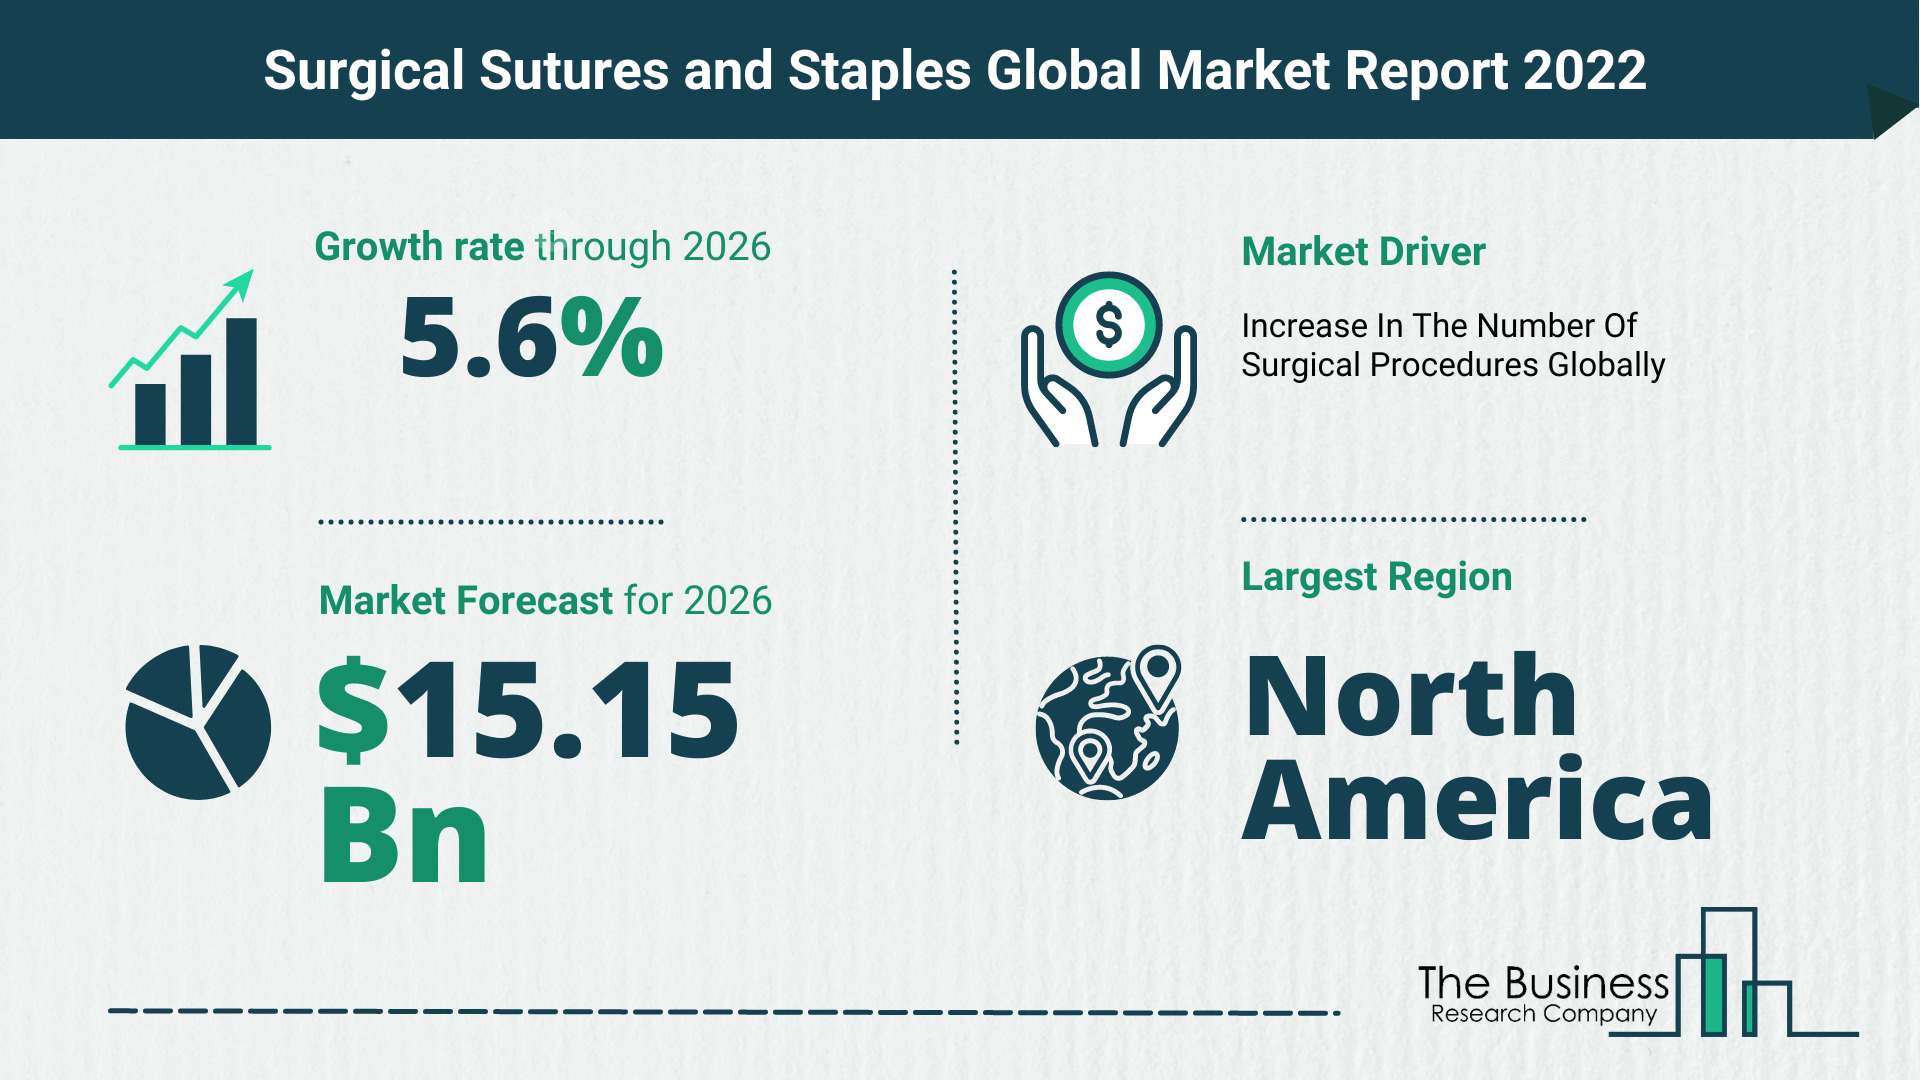 What Is The Surgical Sutures and Staples Market Overview In 2022?